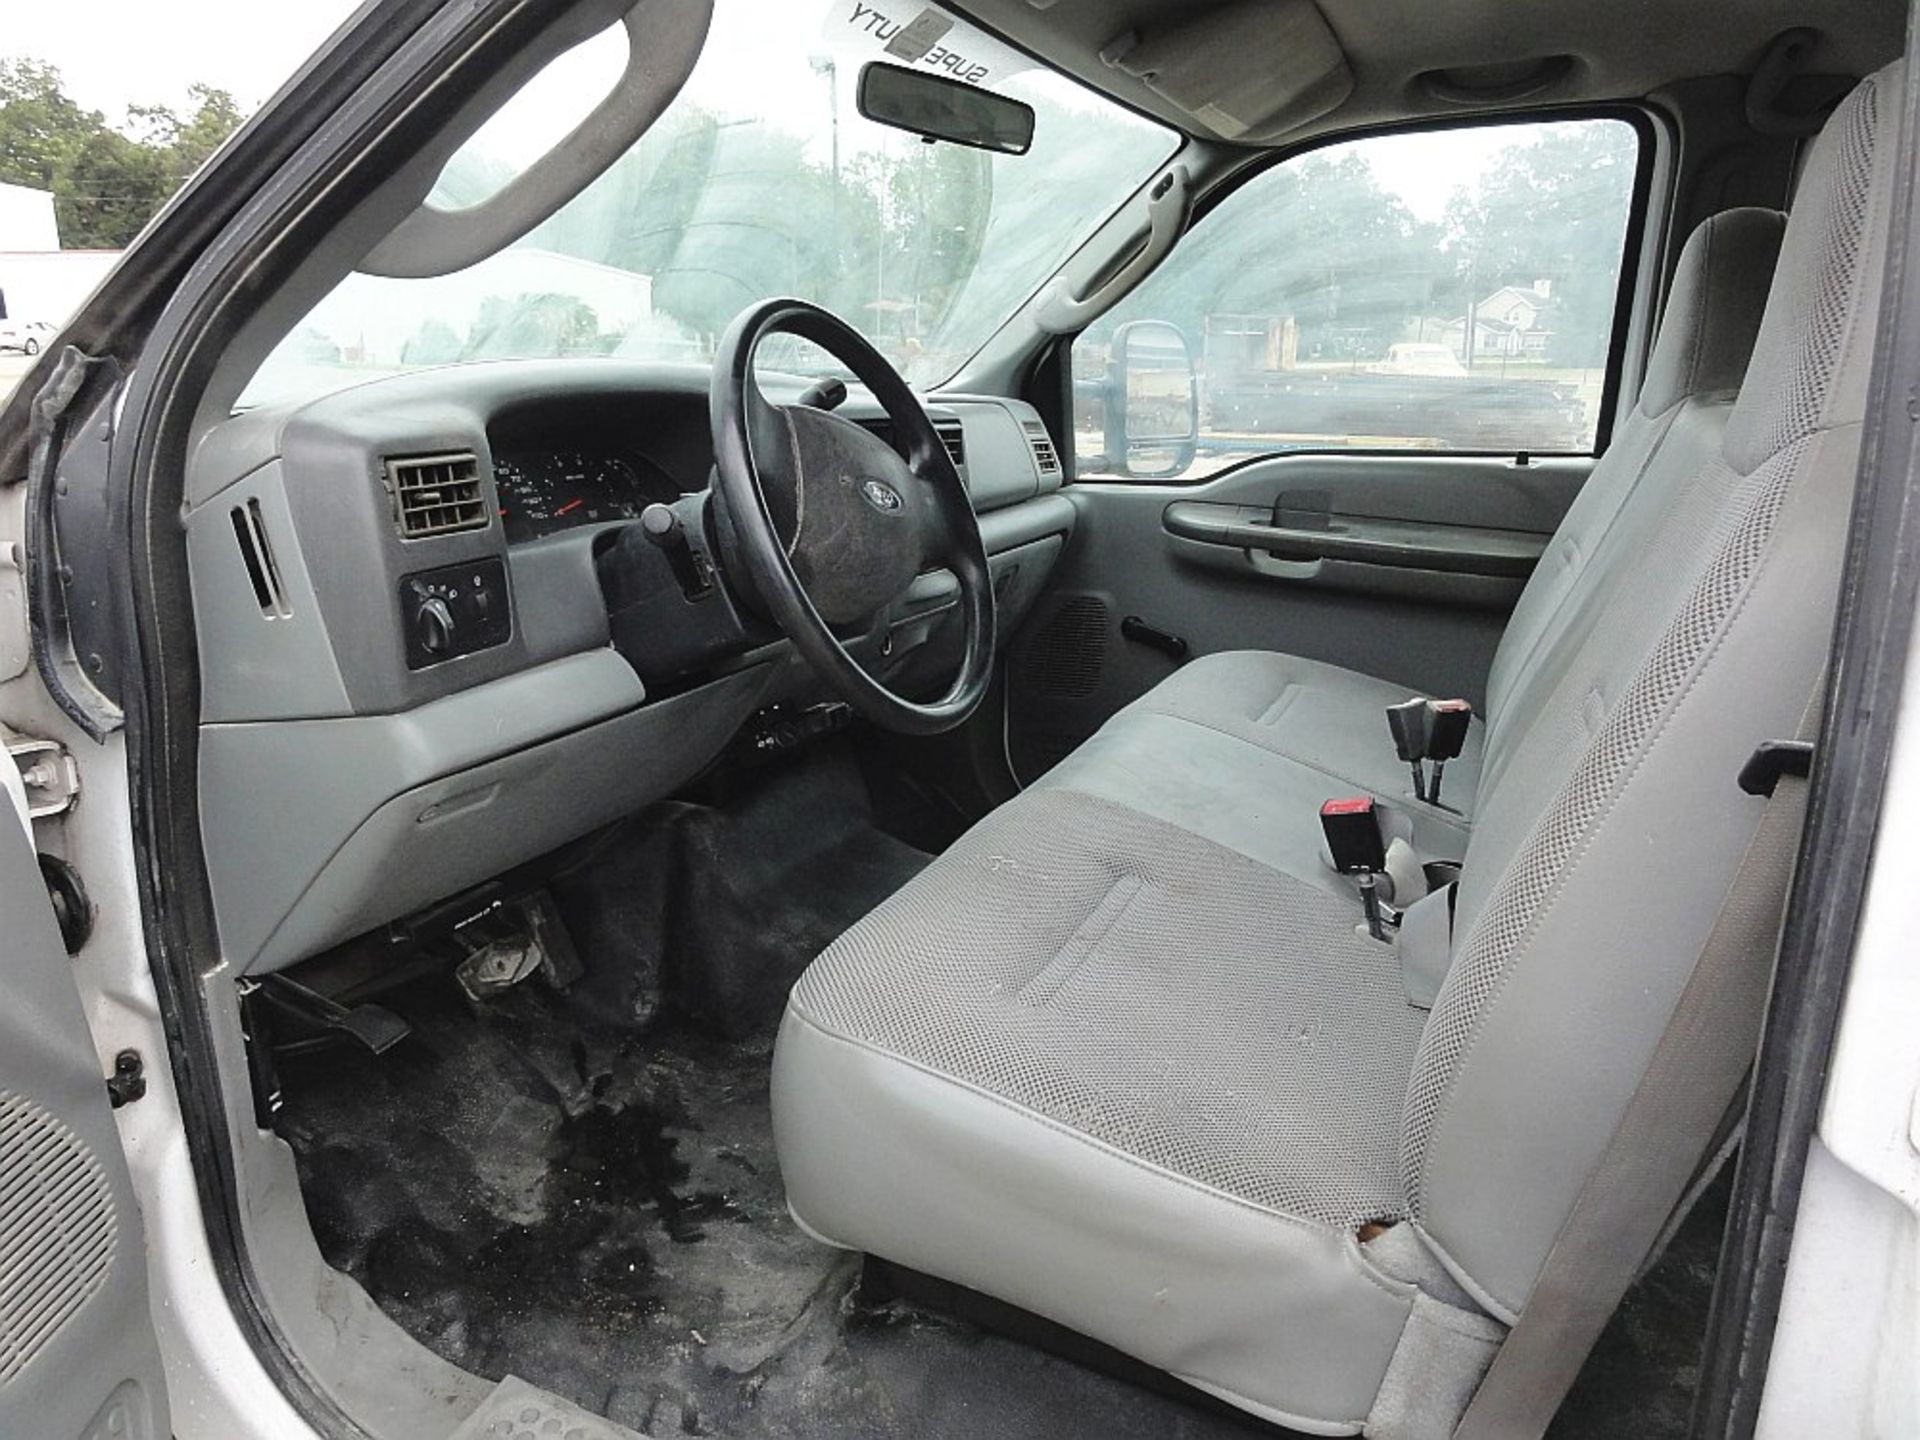 2004 Ford F-450 XL Super Duty - Image 4 of 6